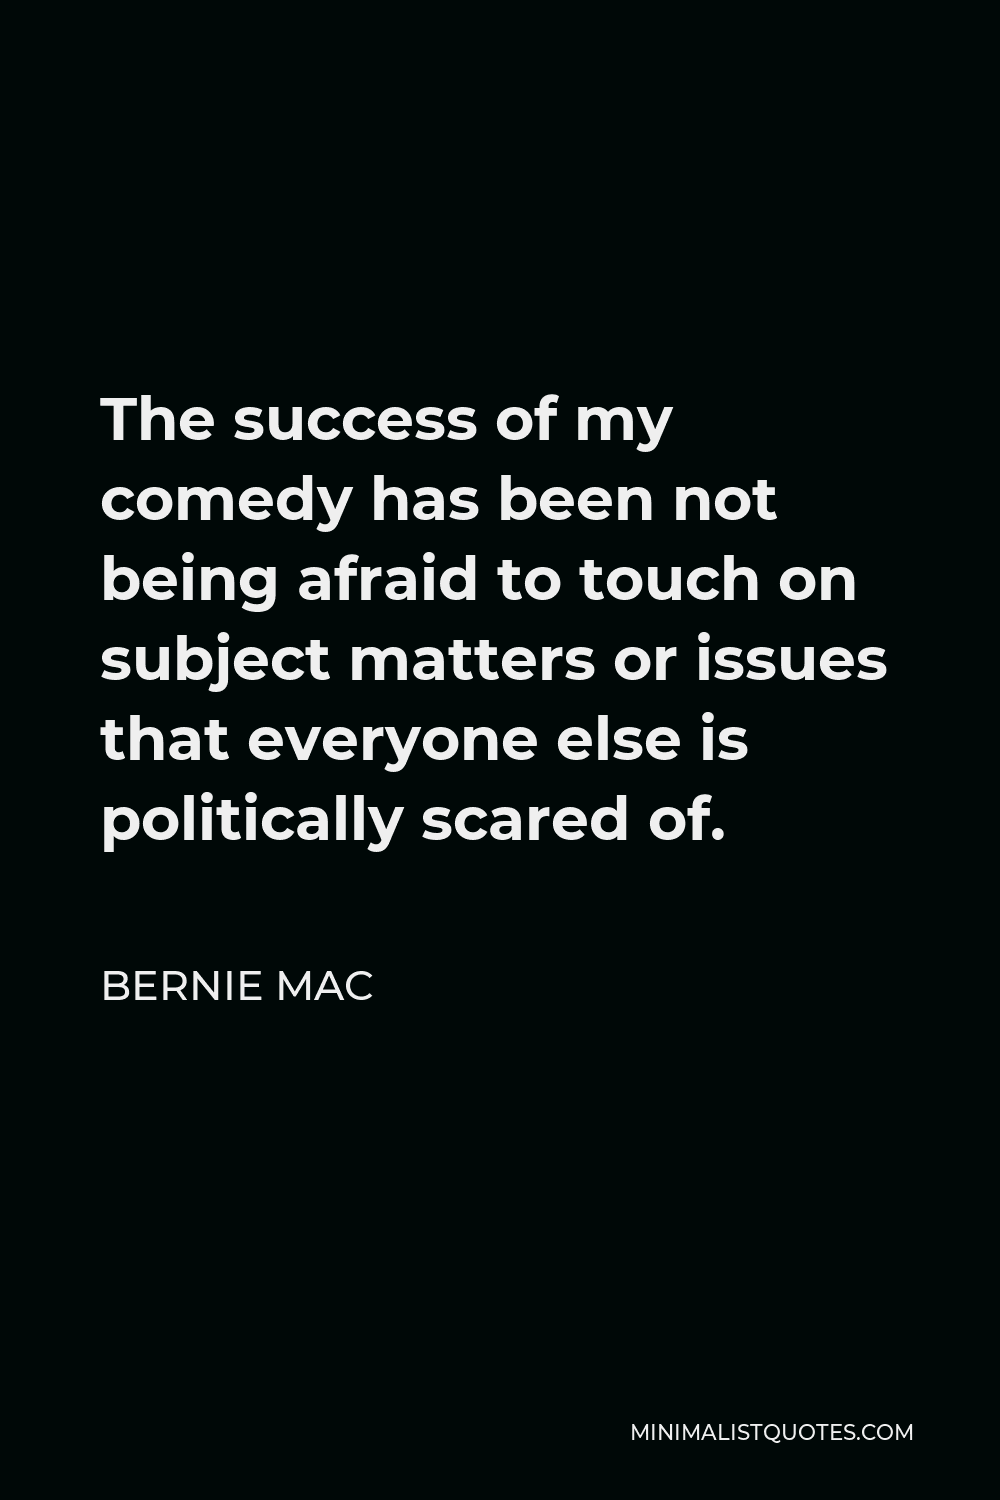 Bernie Mac Quote - The success of my comedy has been not being afraid to touch on subject matters or issues that everyone else is politically scared of.